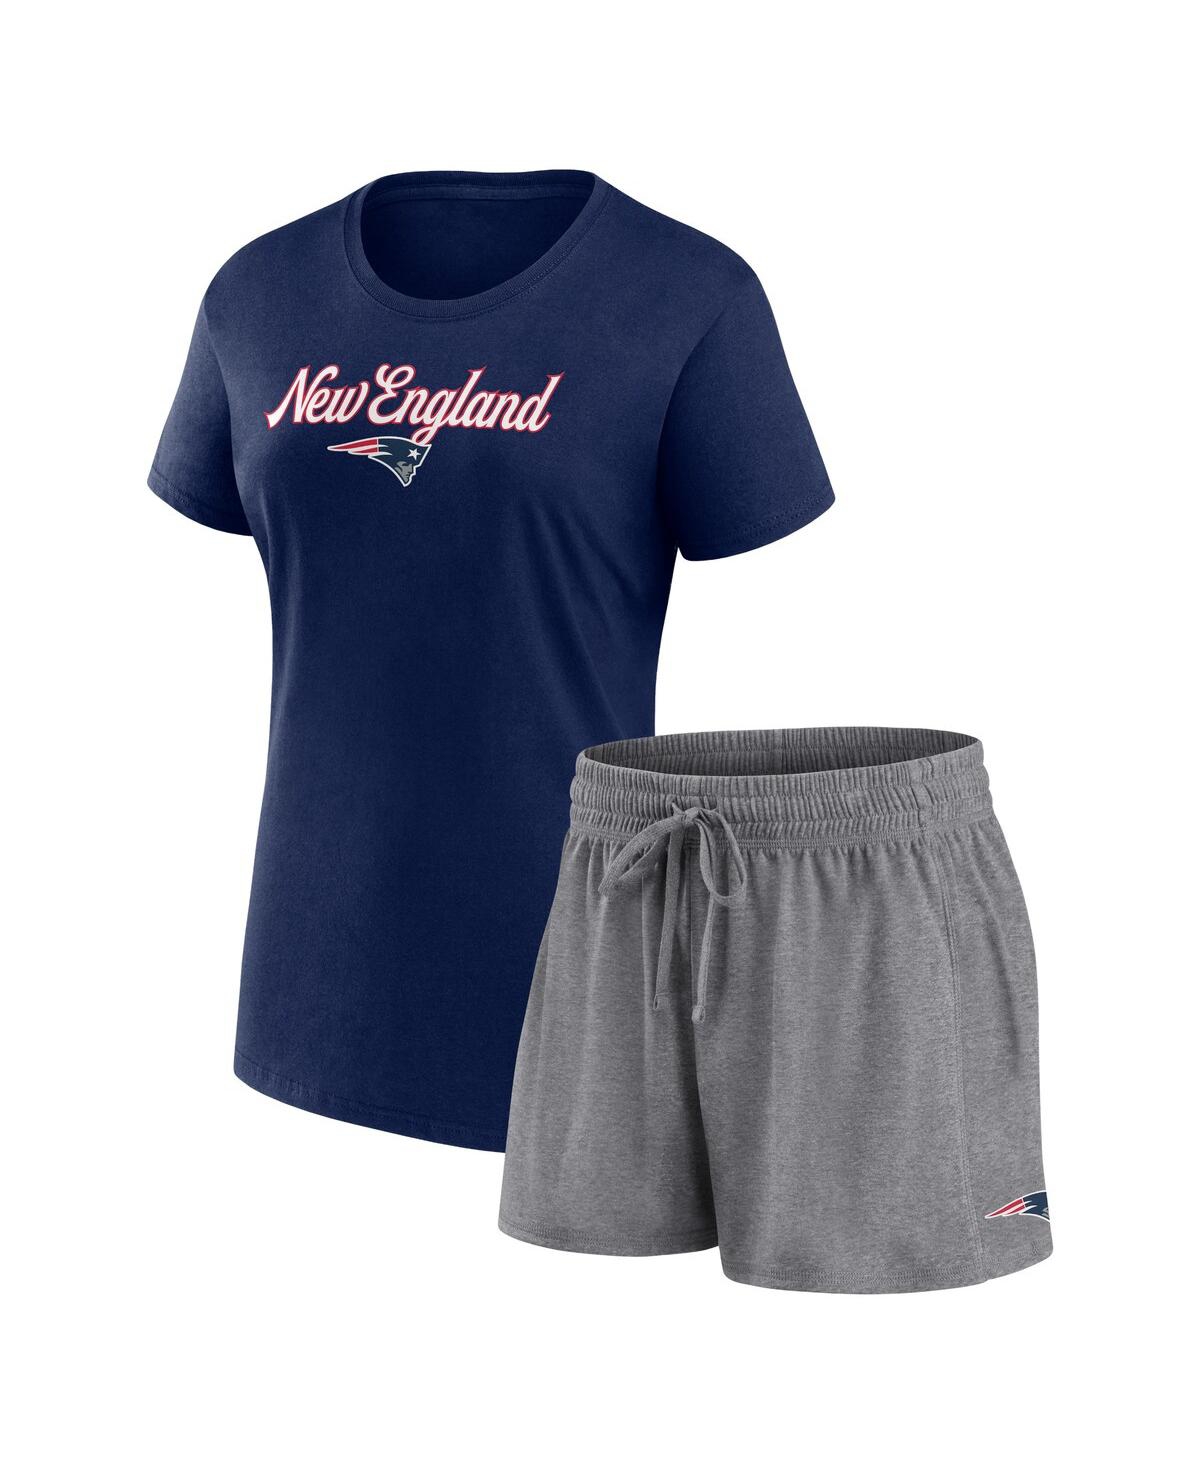 Fanatics Women's  Navy, Heather Charcoal New England Patriots Script T-shirt And Shorts Lounge Set In Navy,gray